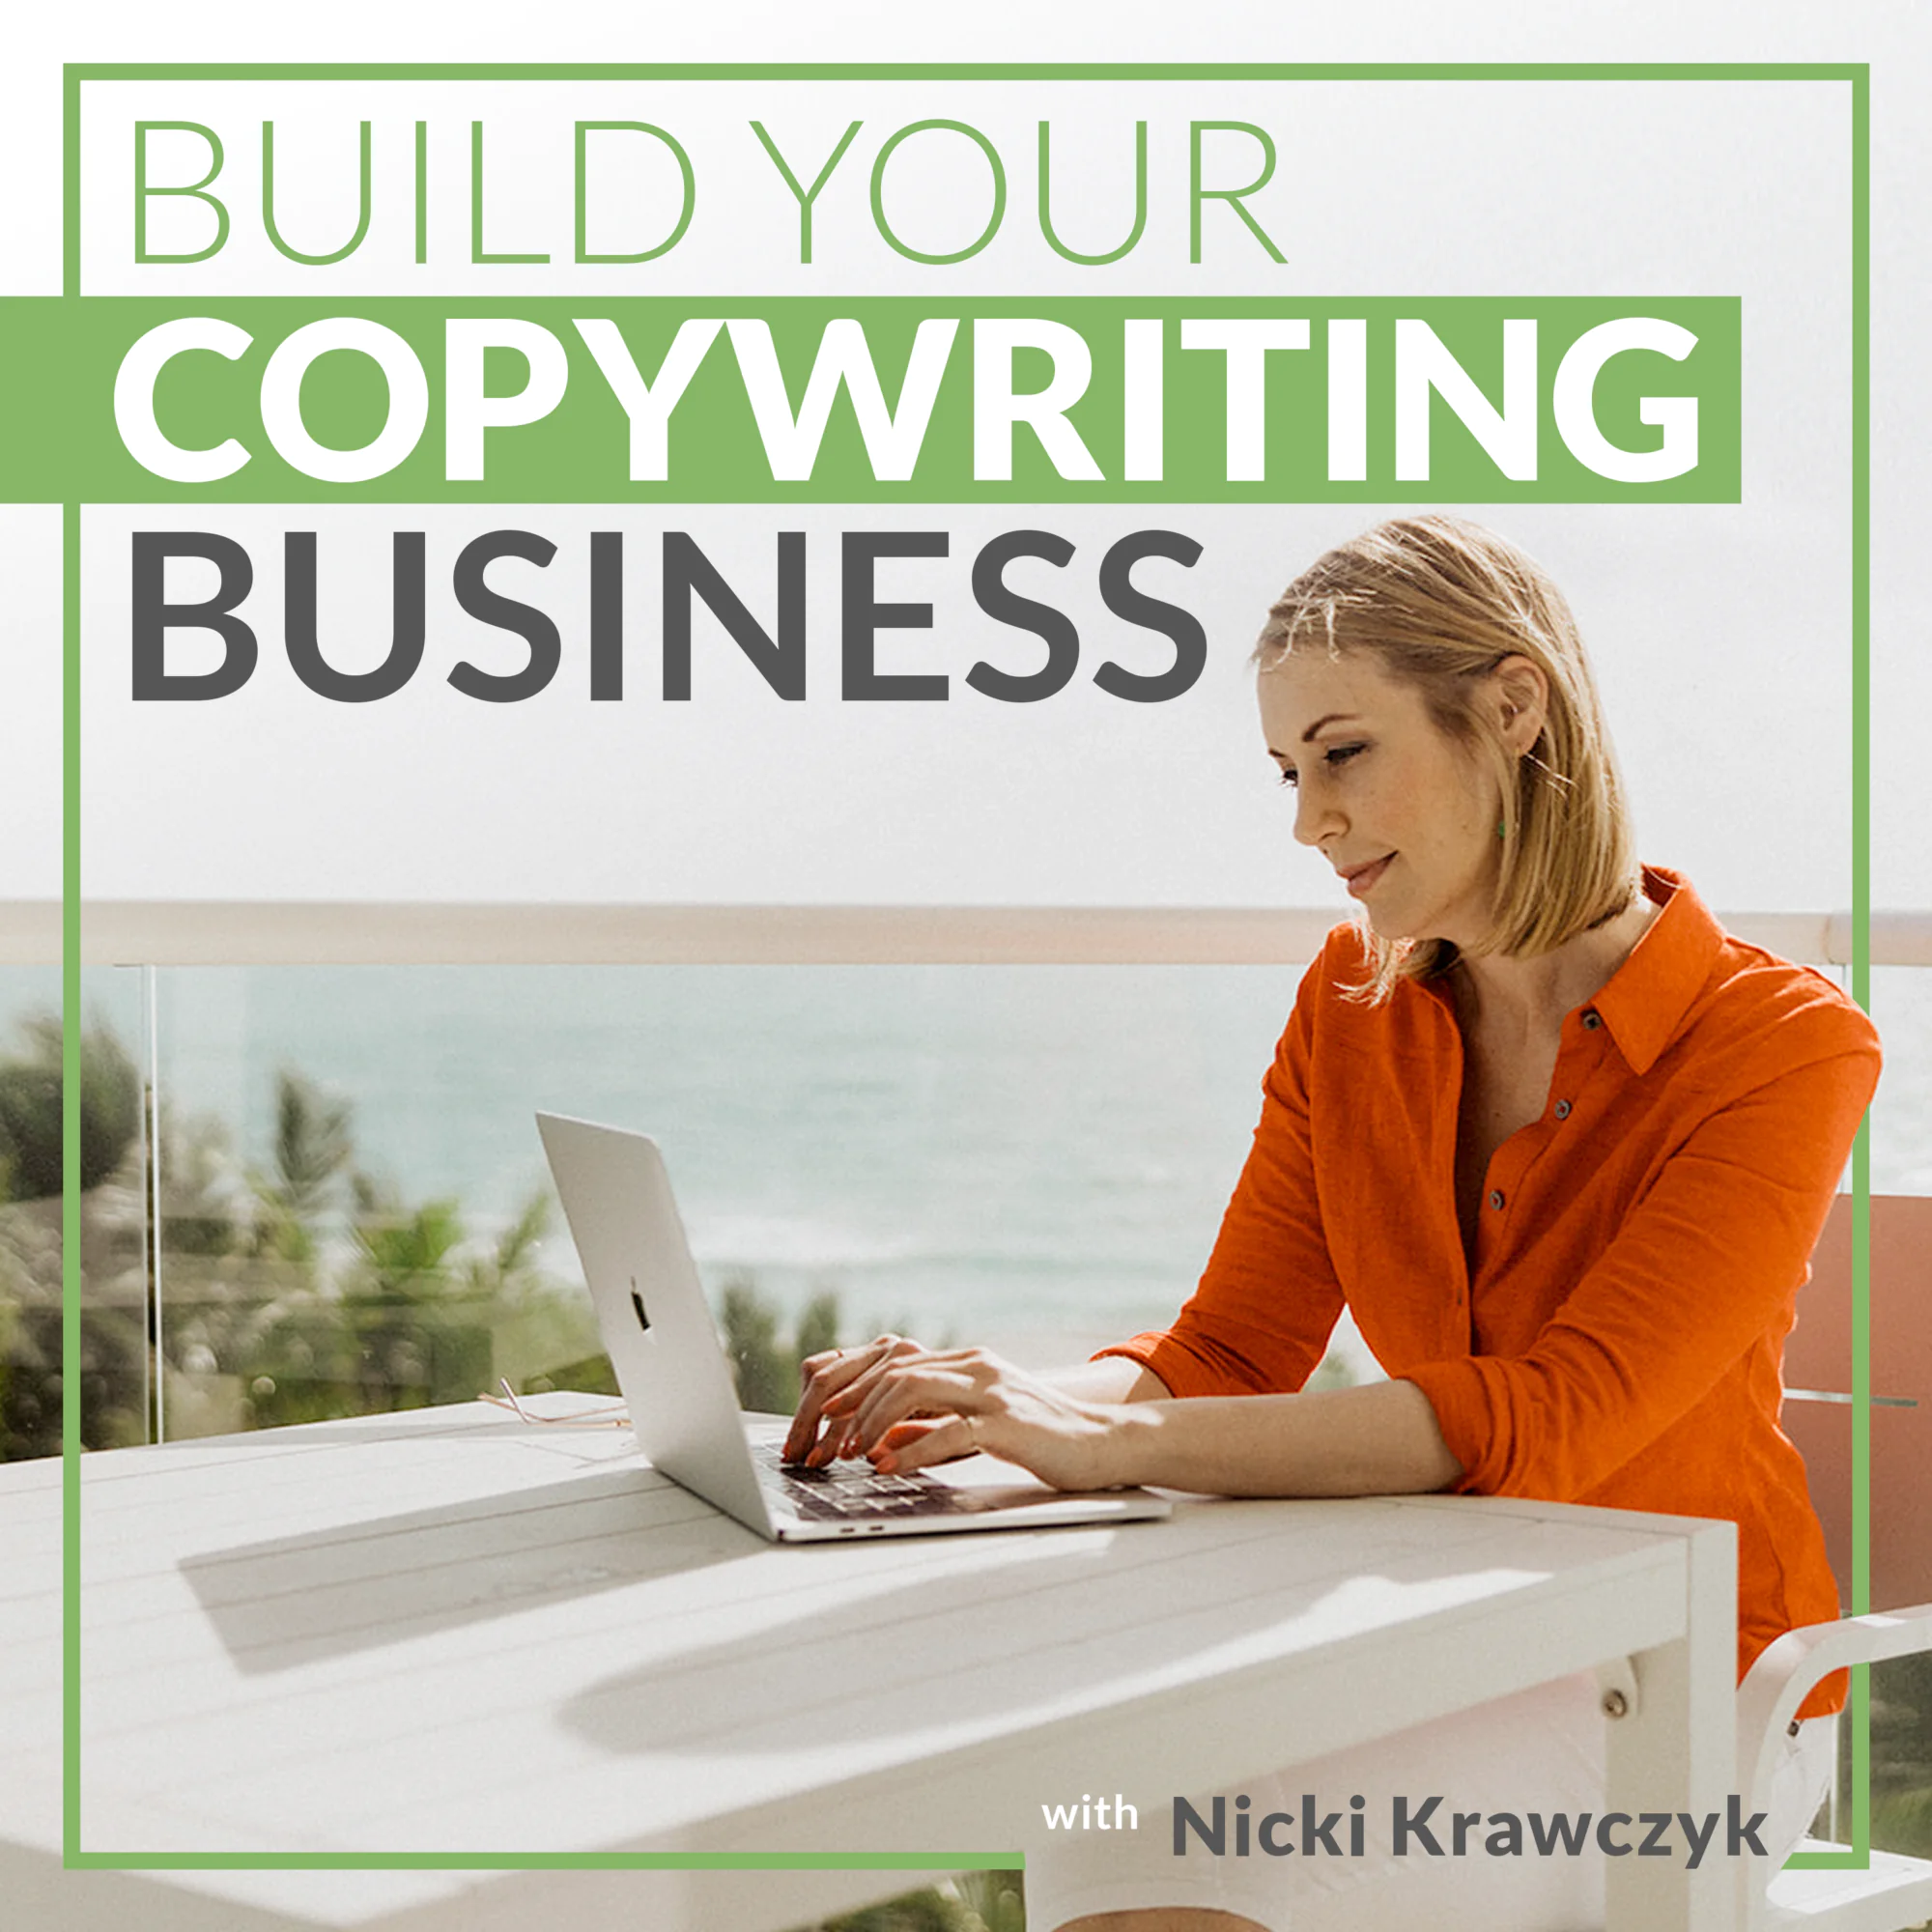 Nicki Krawczyk, founder of Filthy Rich Writer and the Build Your Copywriting Business podcast